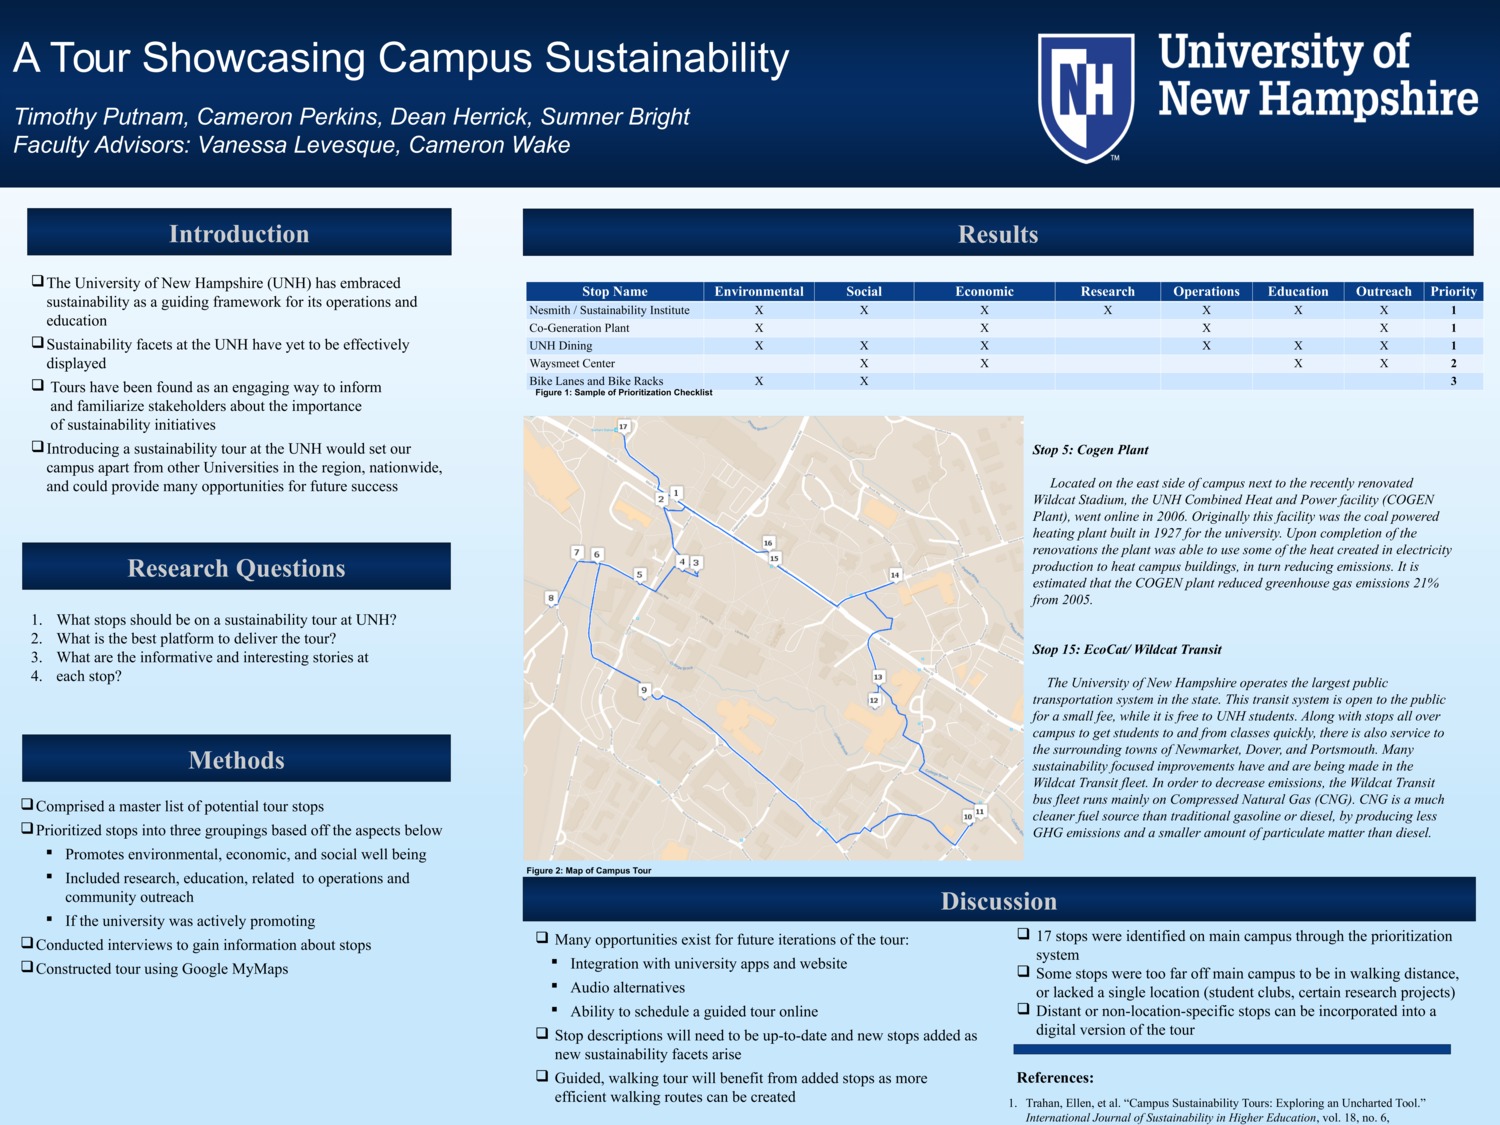 A Tour Showcasing Campus Sustainability by sbb1001